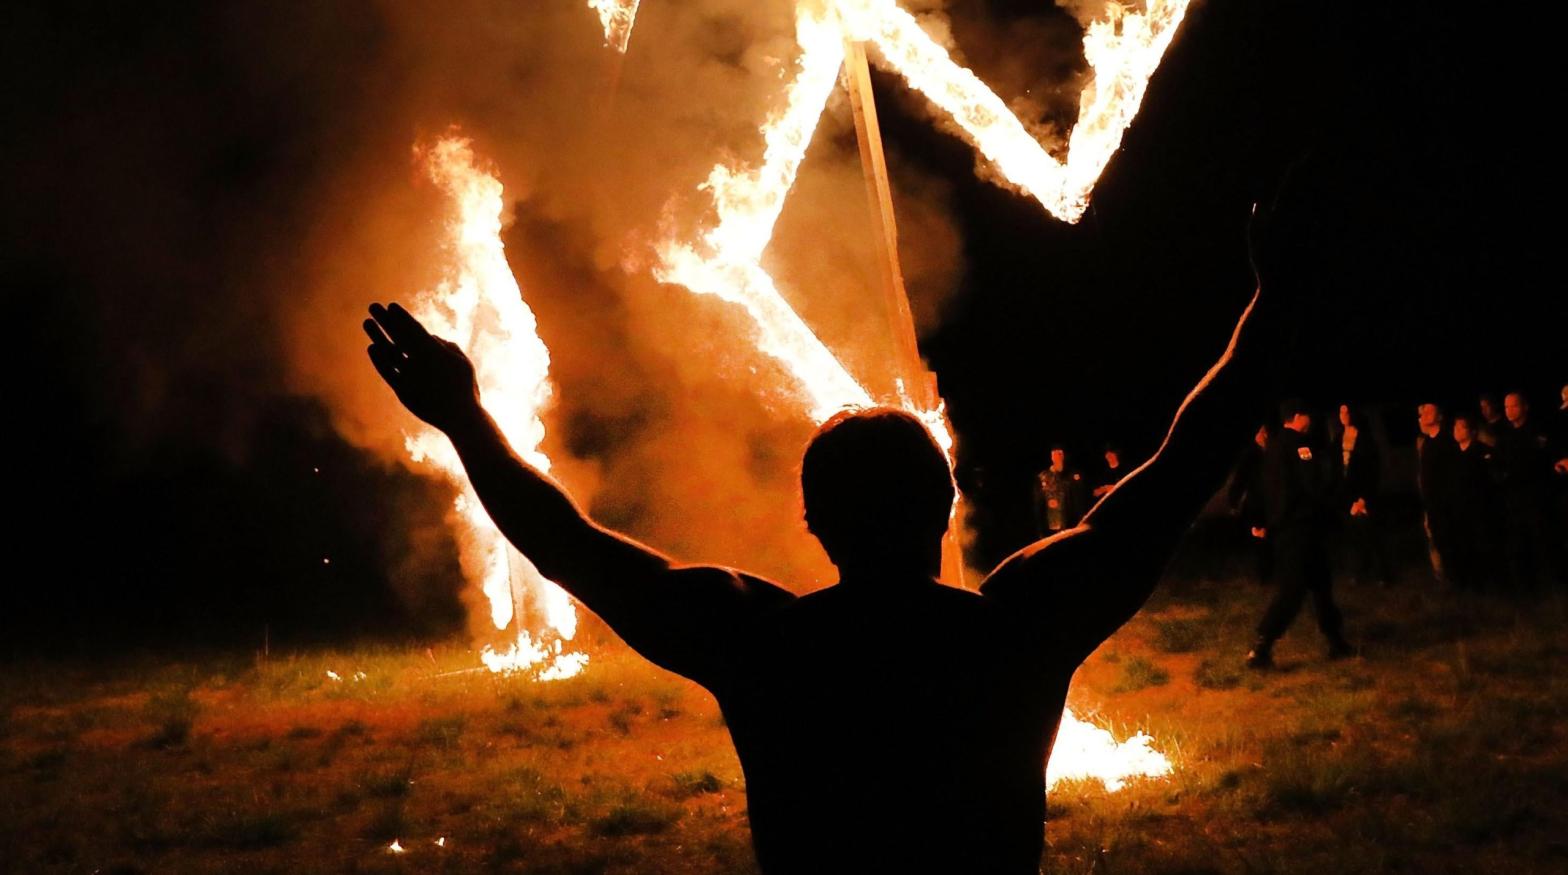 Members of the National Socialist Movement, one of the largest neo-Nazi groups in the US, hold a swastika burning after a rally on April 21, 2018 in Draketown, Georgia.  (Photo: Spencer Platt, Getty Images)